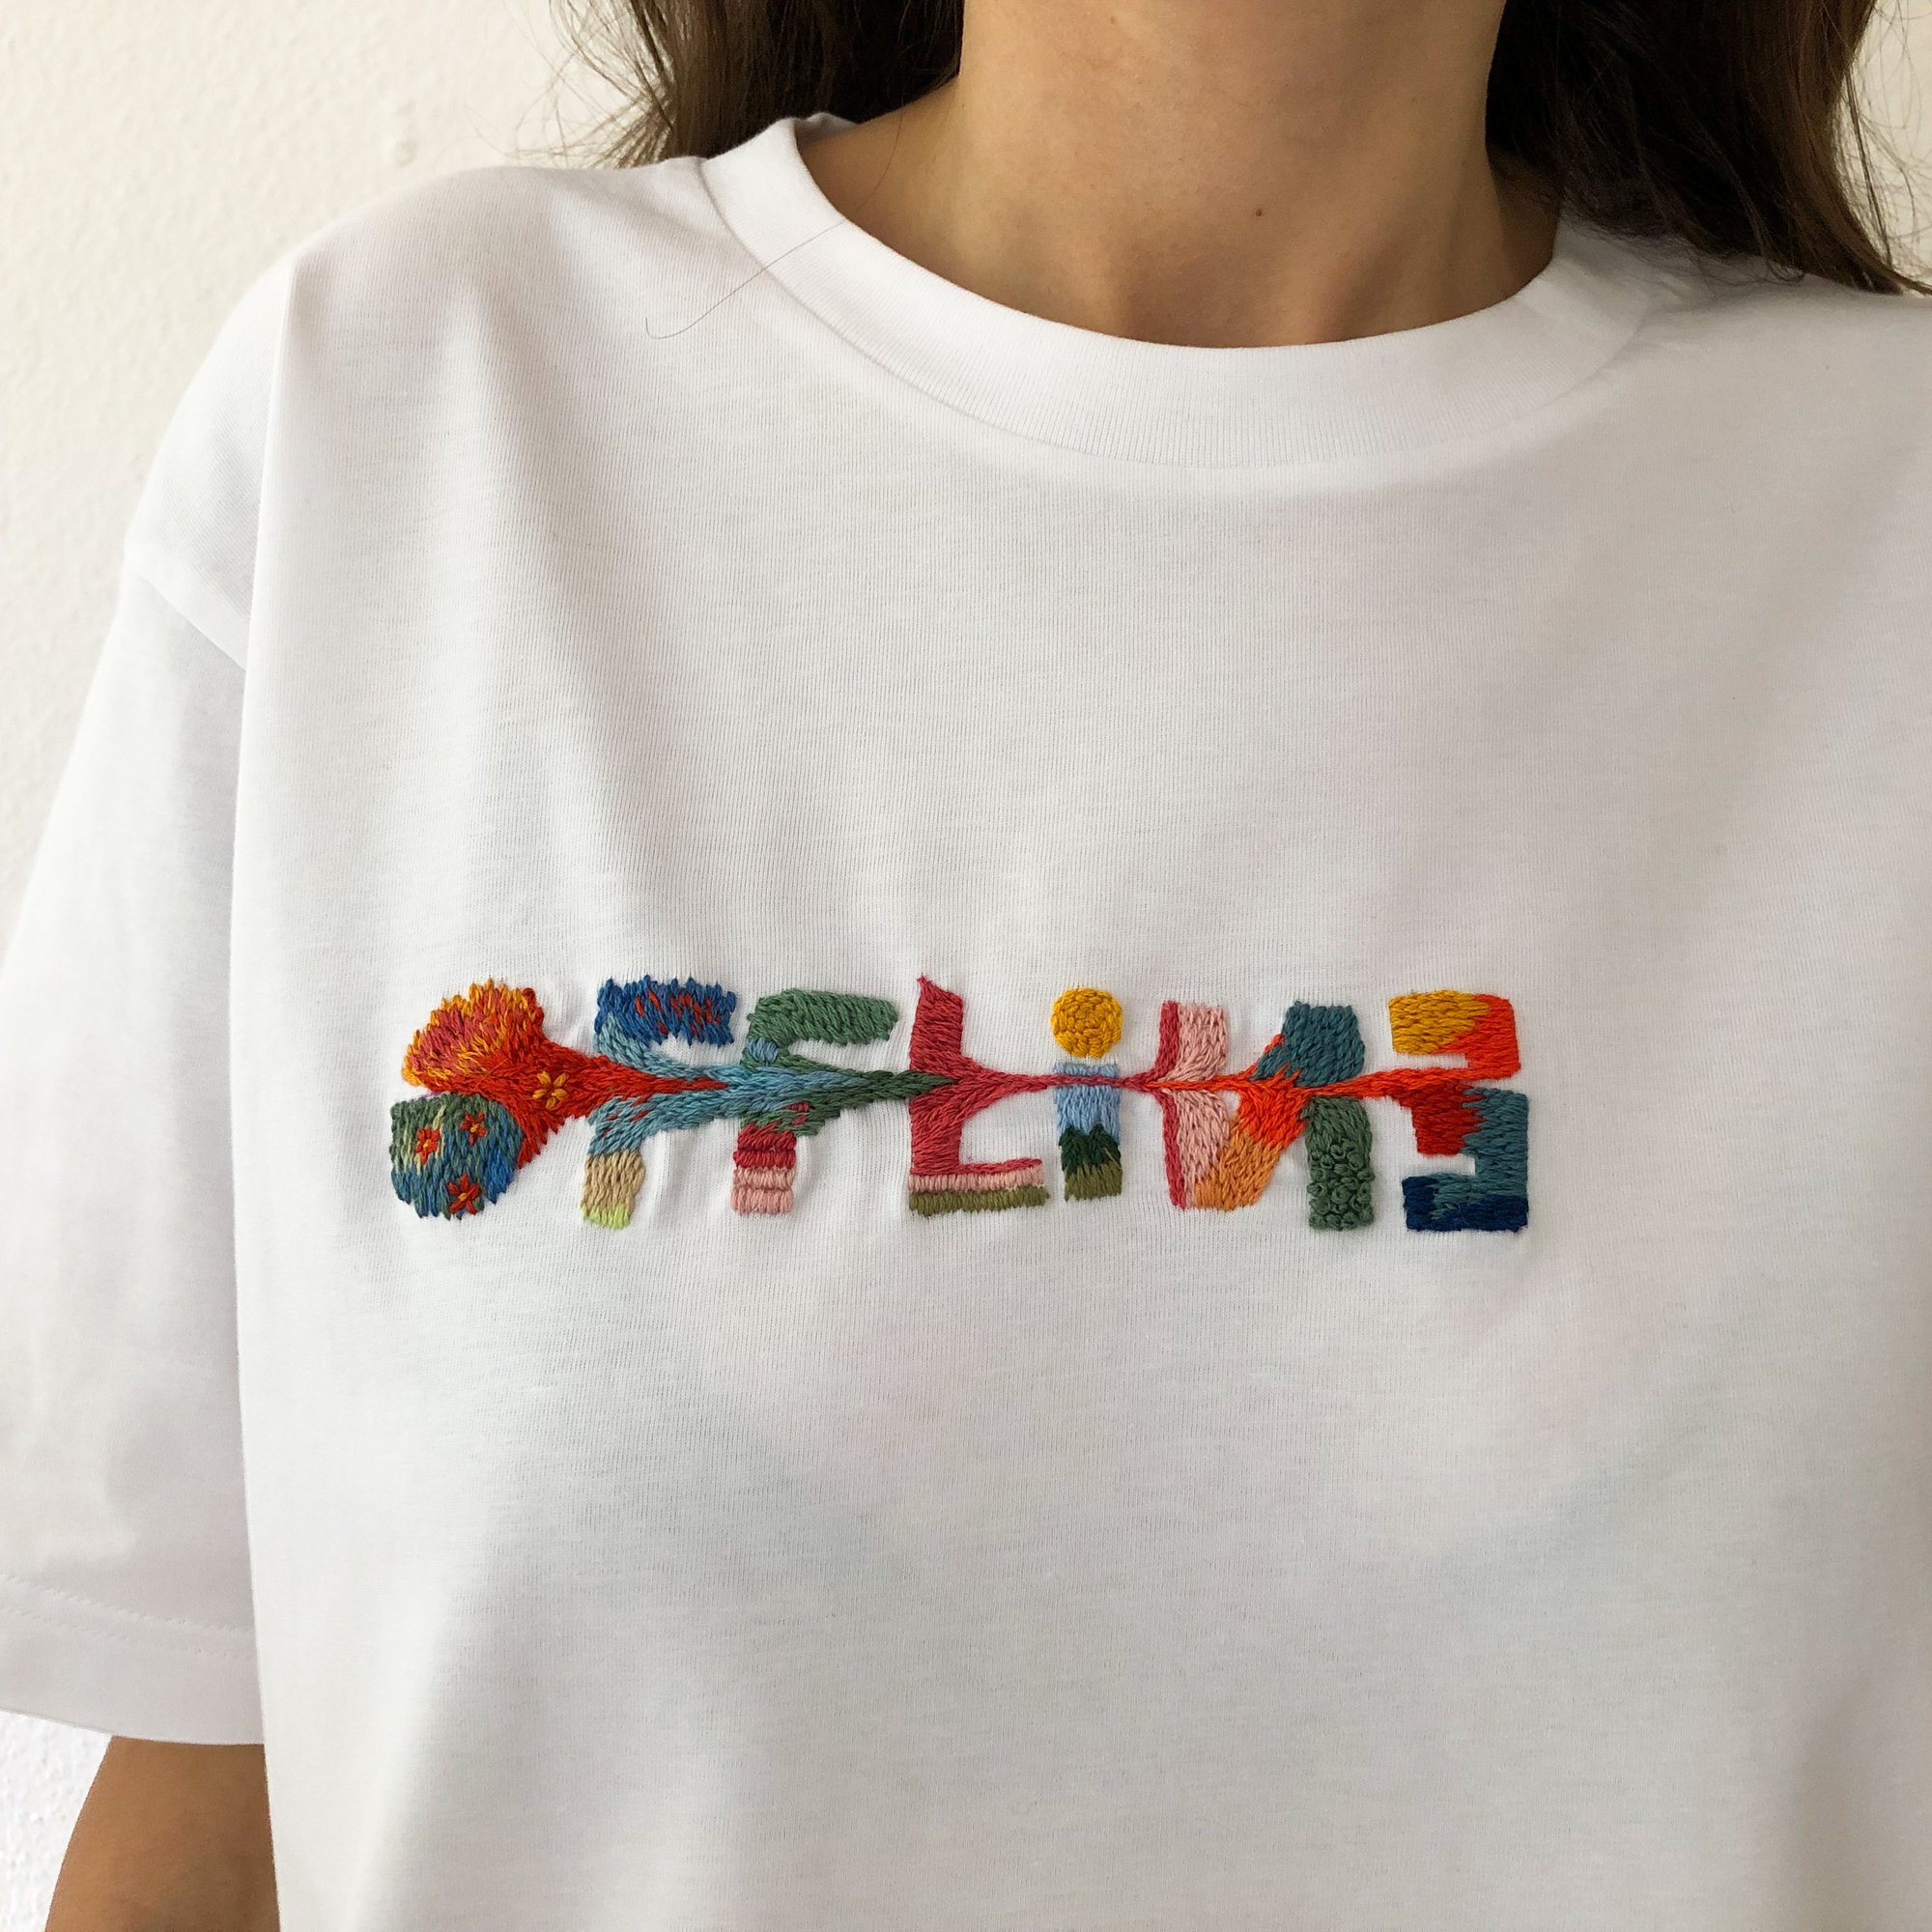 OFFLINE - hand embroidered t-shirt, available in ALL SIZES, limited edition